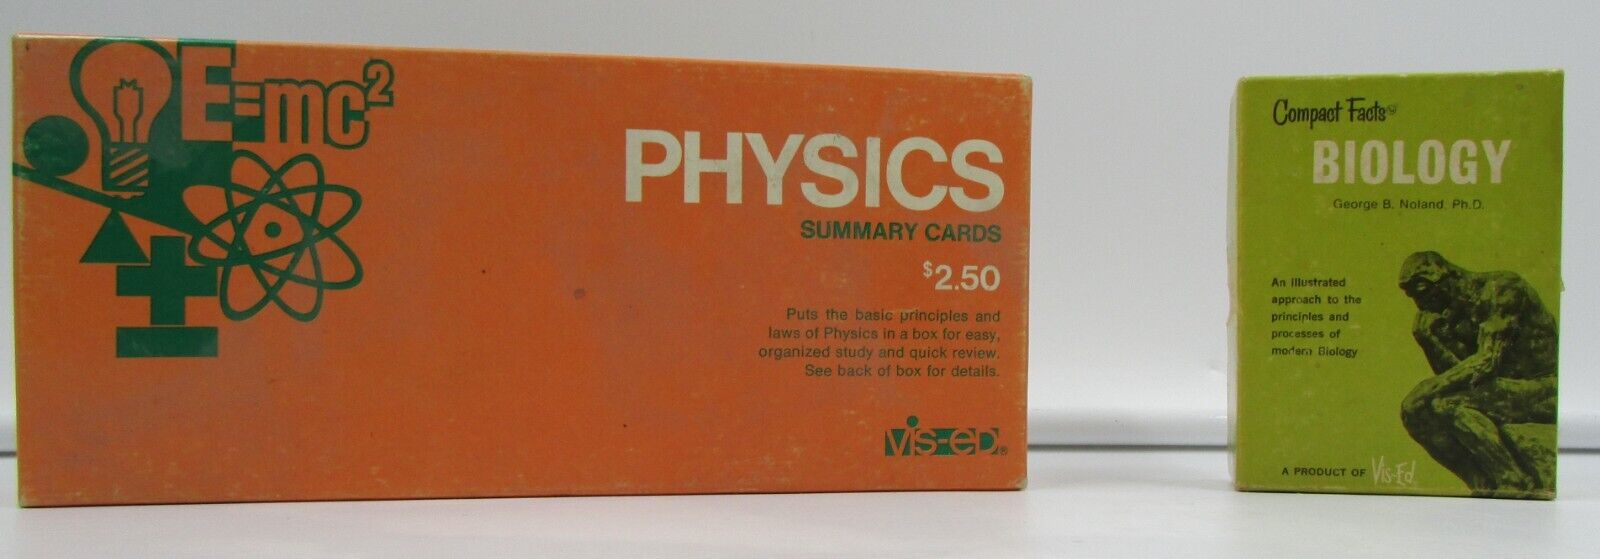 Vintage Physics and Biology Summary Cards by Vis-Ed, 1964